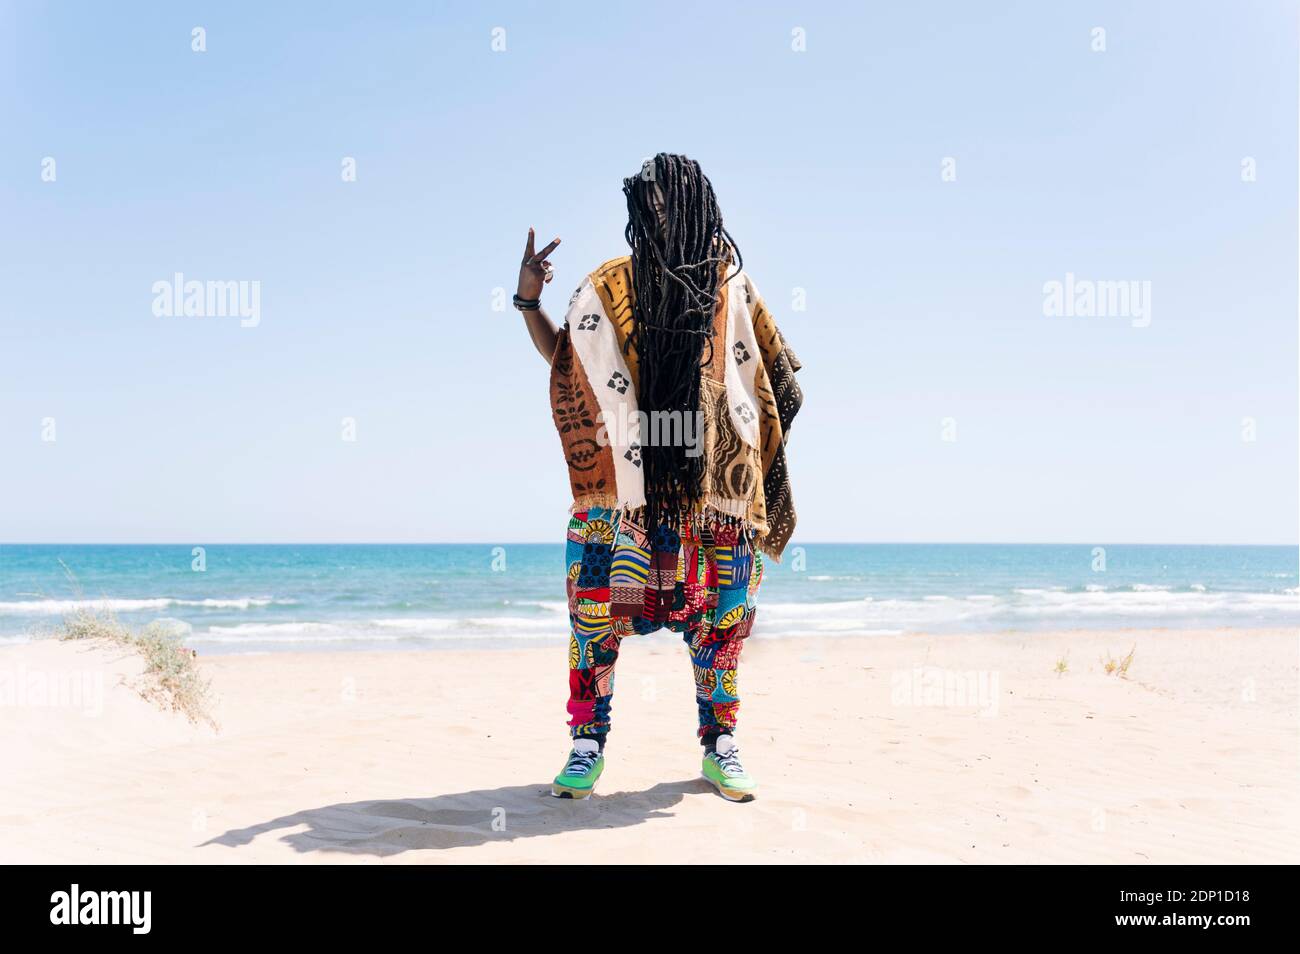 Man standing on beach with dreadlocks hiding his face, making rude hand sign Stock Photo